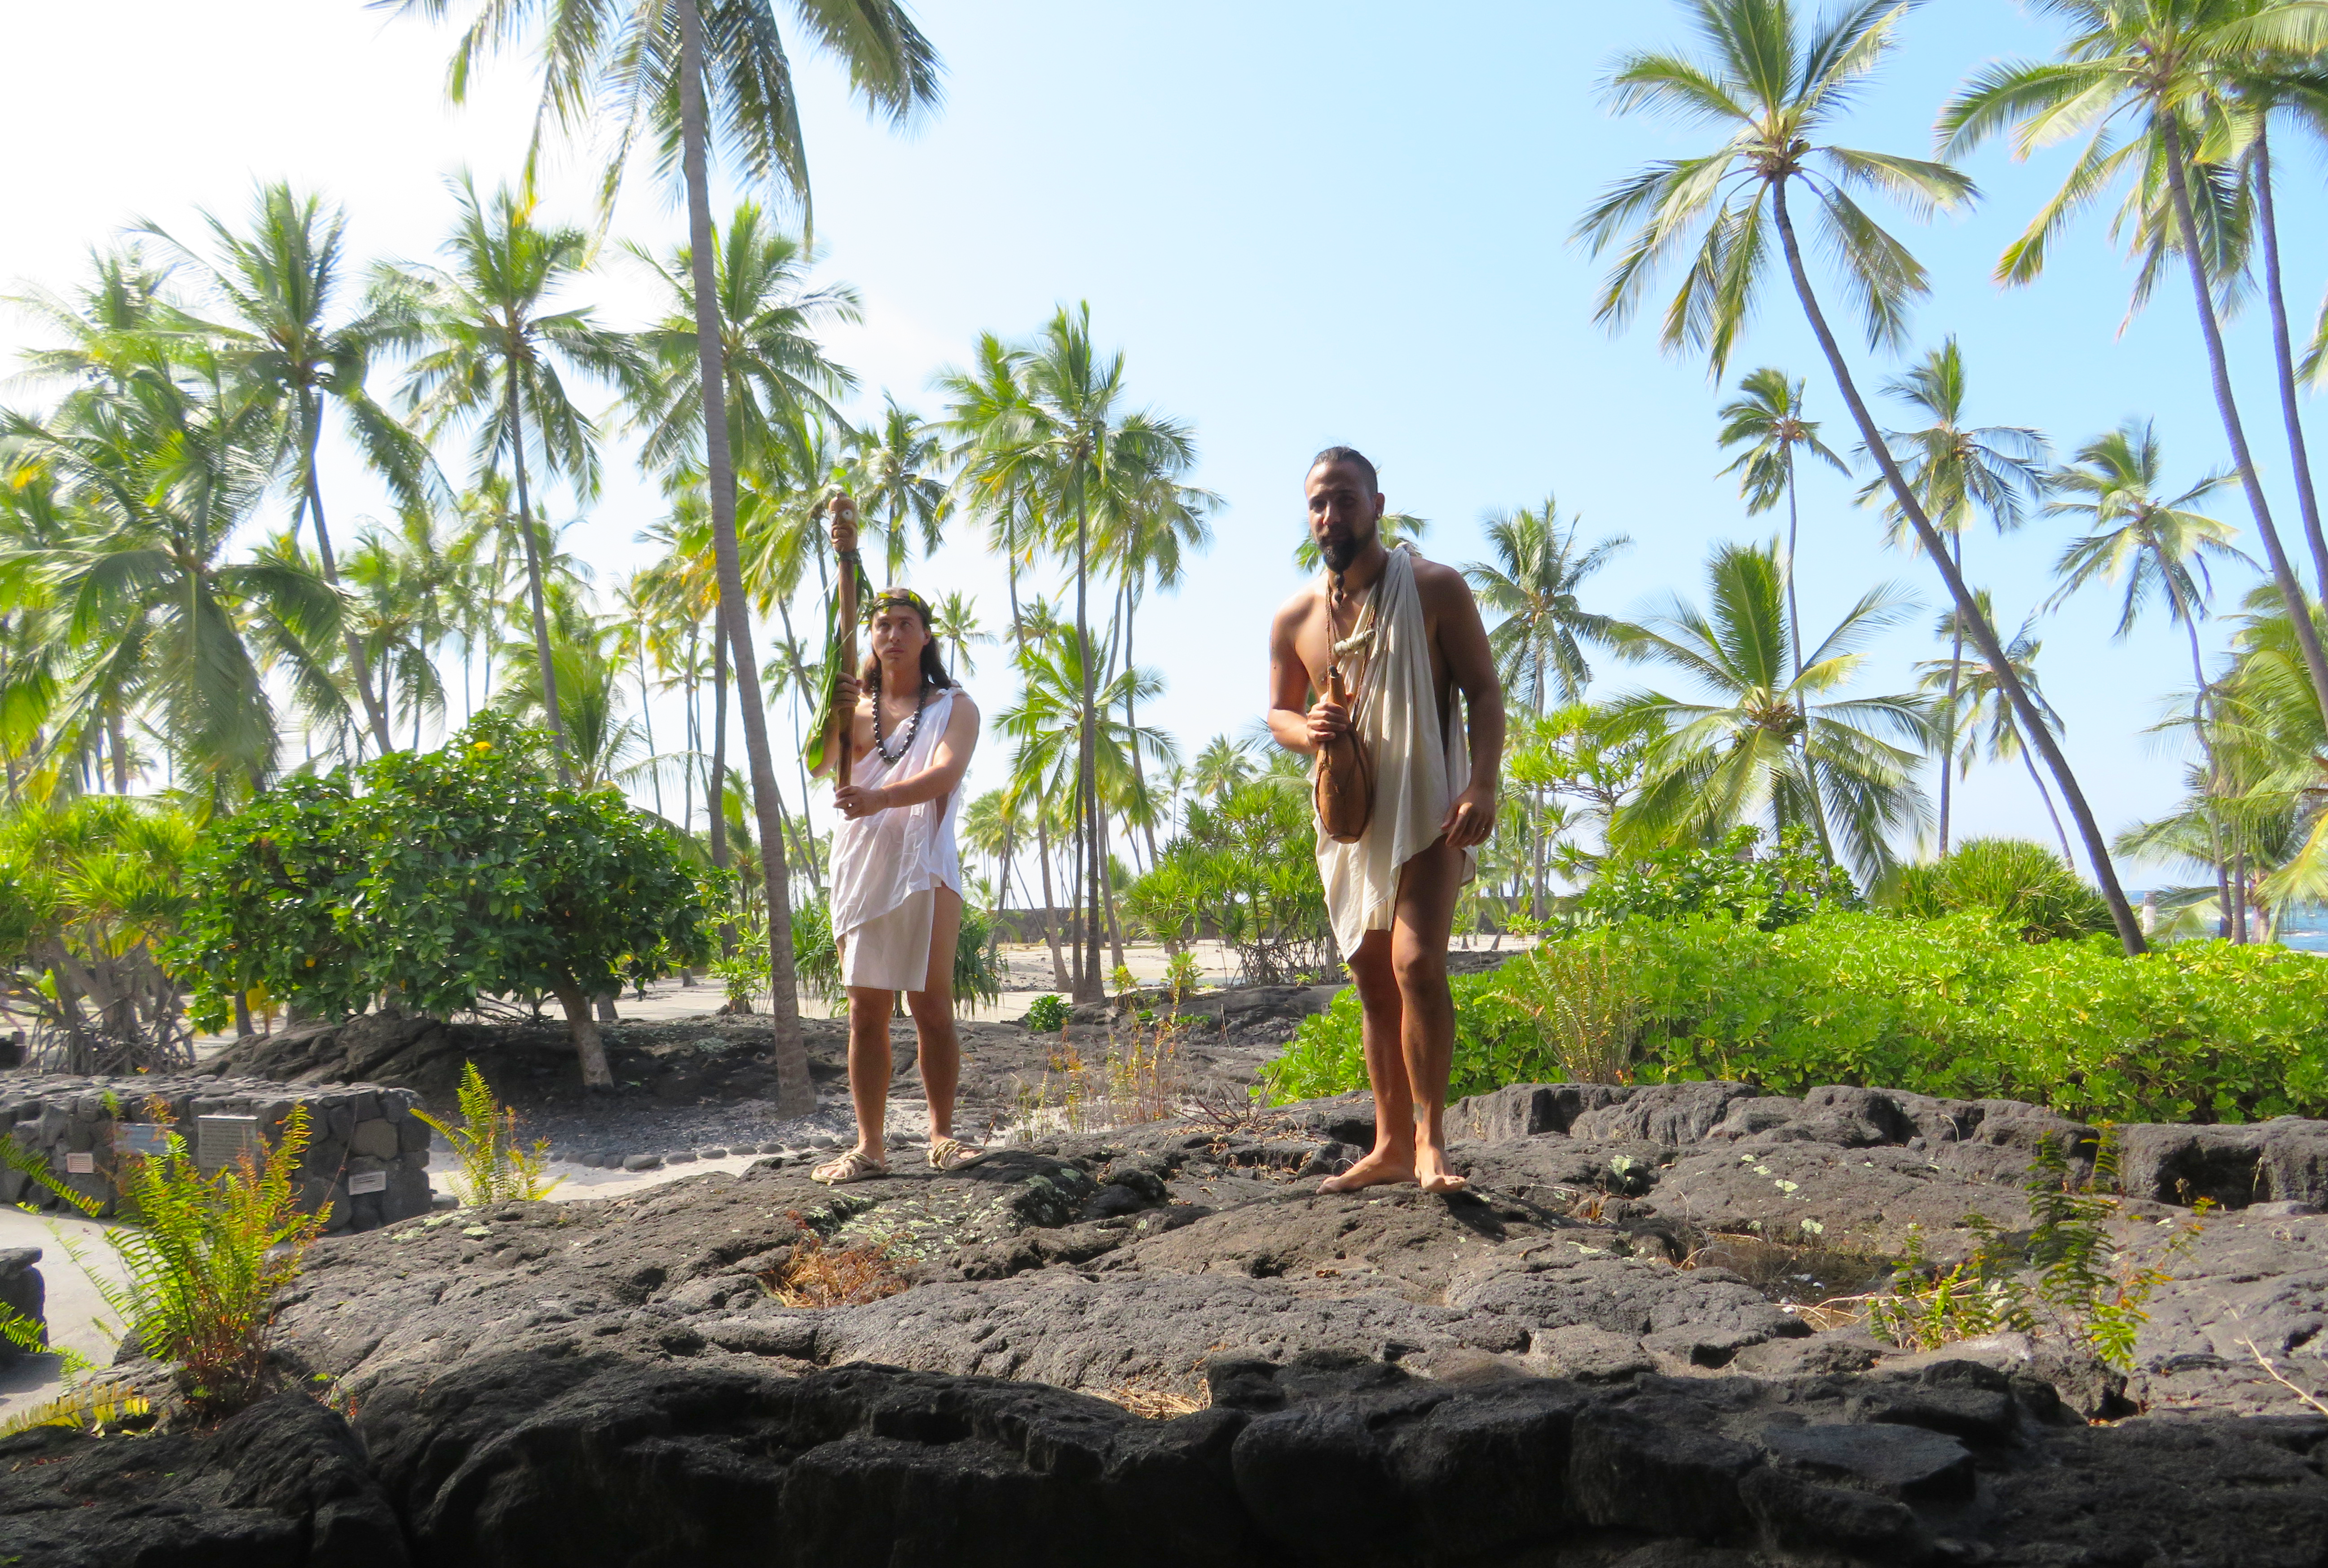 Two men dressed in white traditional clothing walk across lava rock. One holds a carved image of the akua (god) lono. The other carries a gourd water container. Coconut trees line the background.